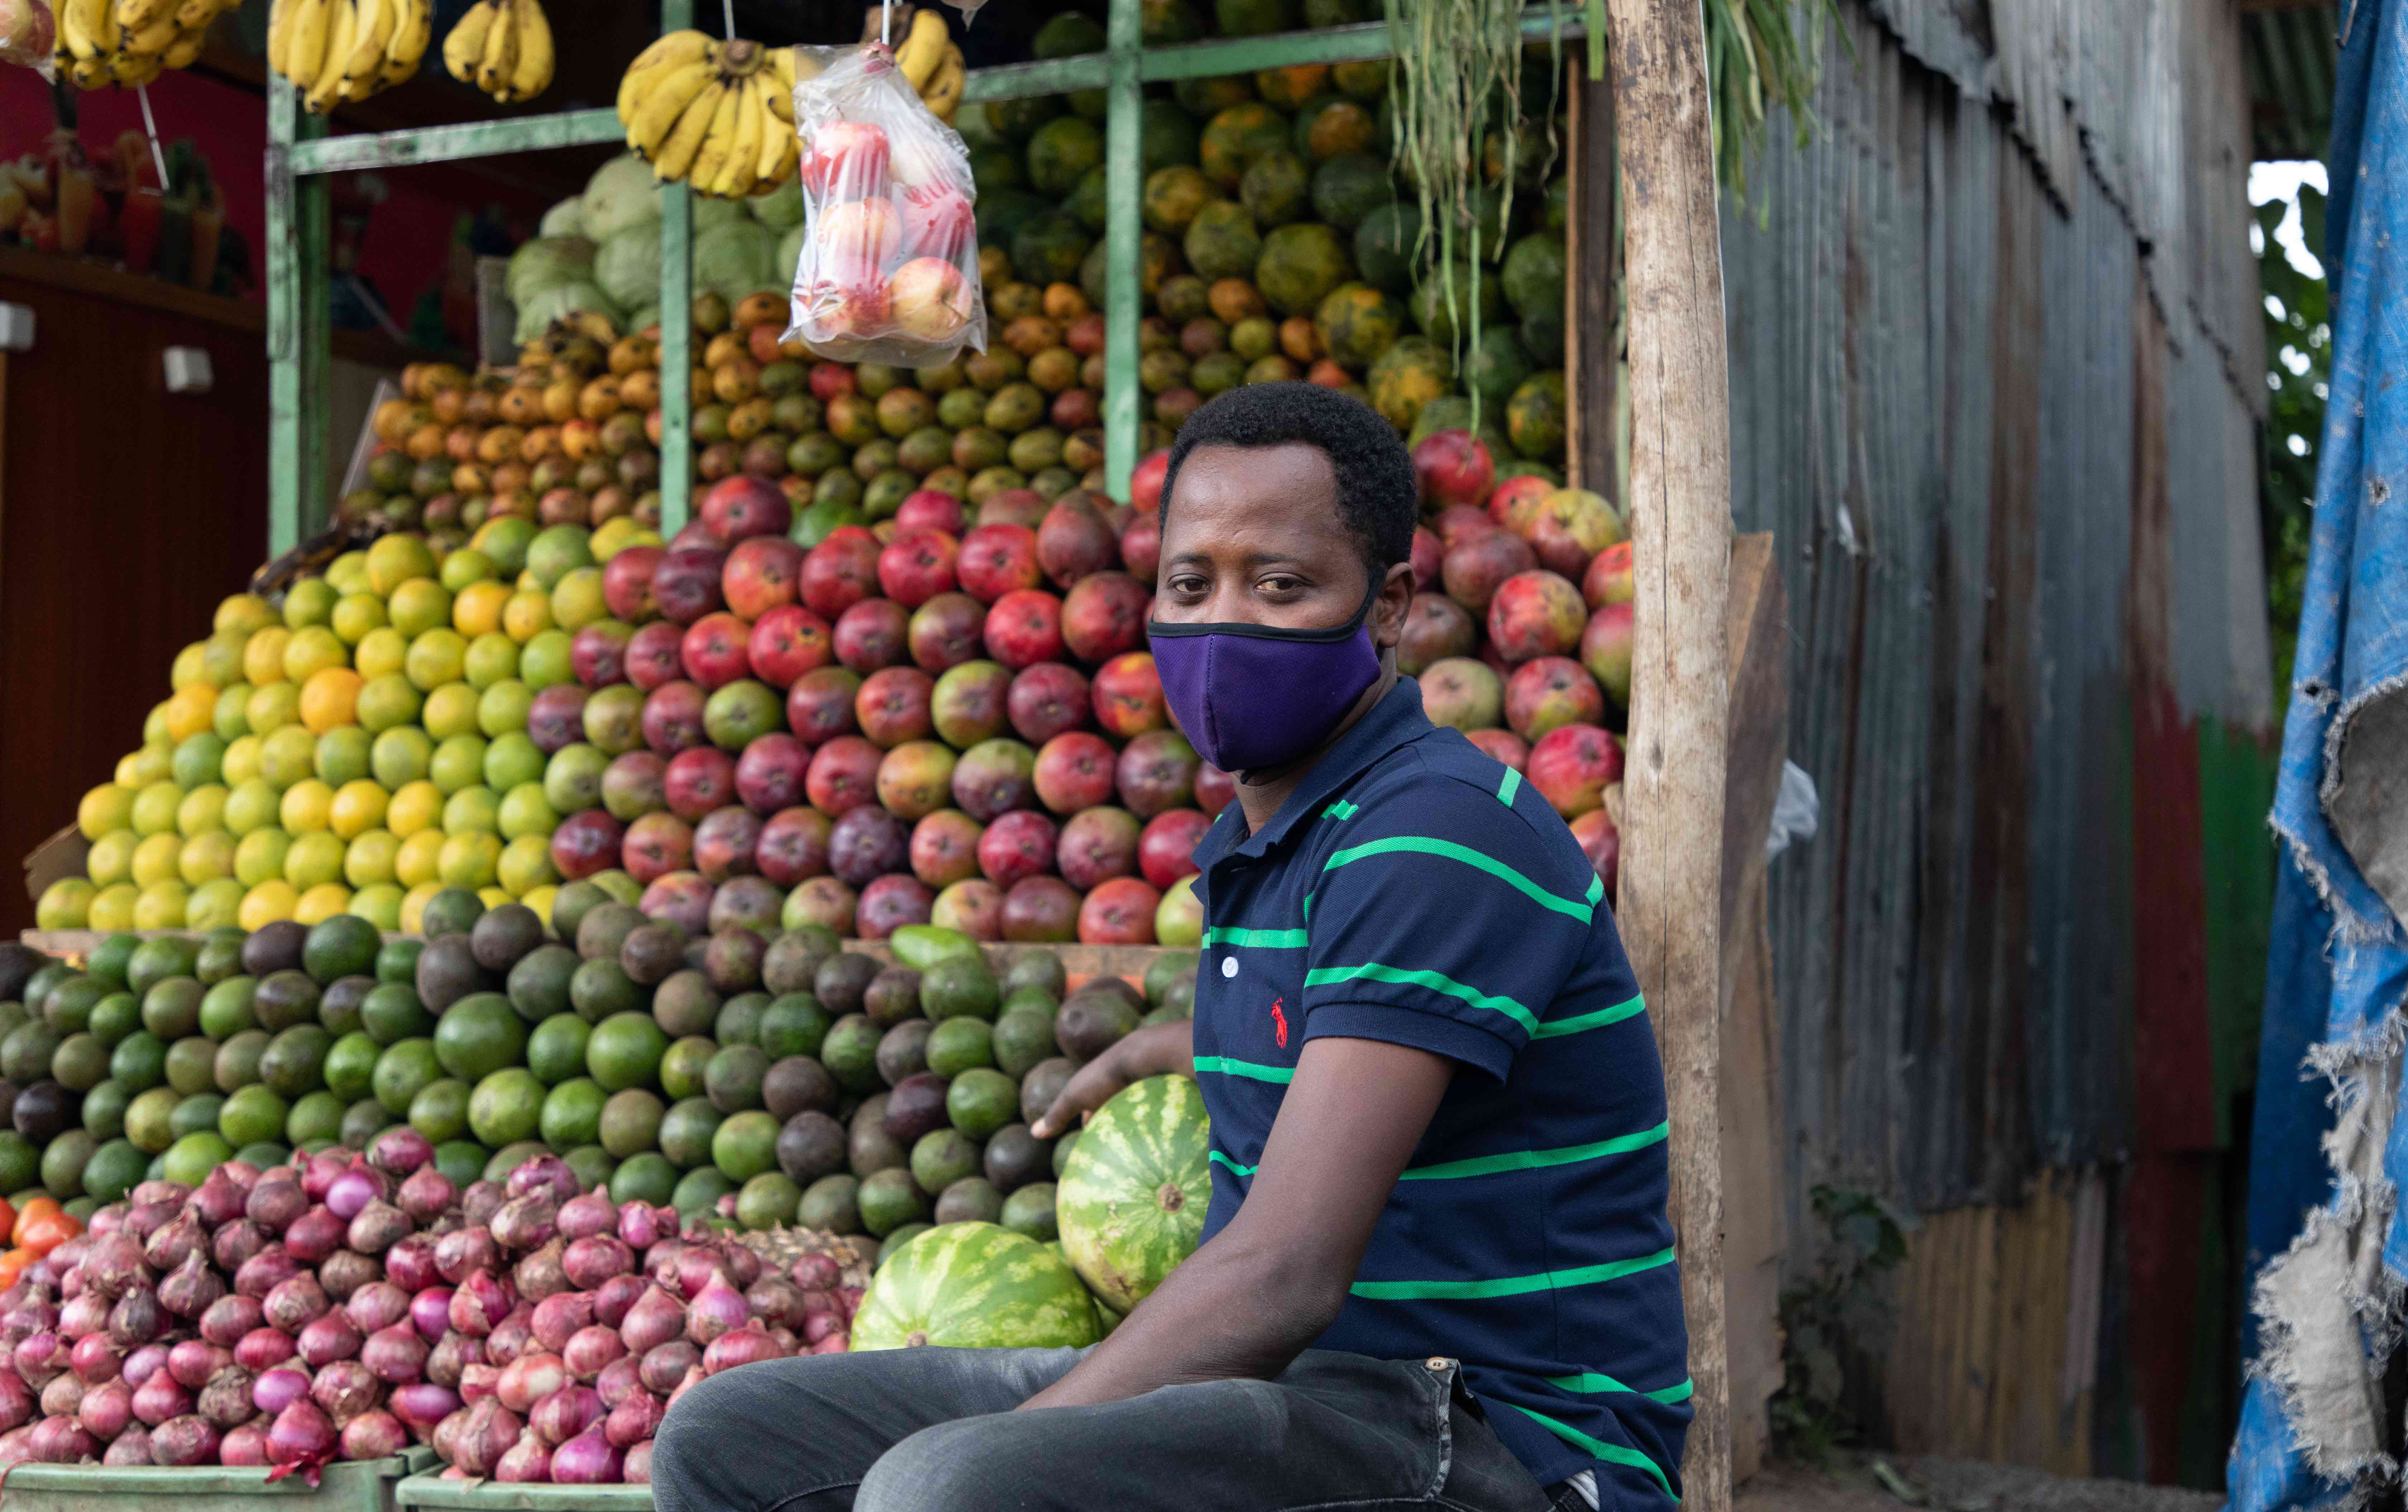 Survey: Despite COVID-19, food consumption remains steady in Addis Ababa, Ethiopia